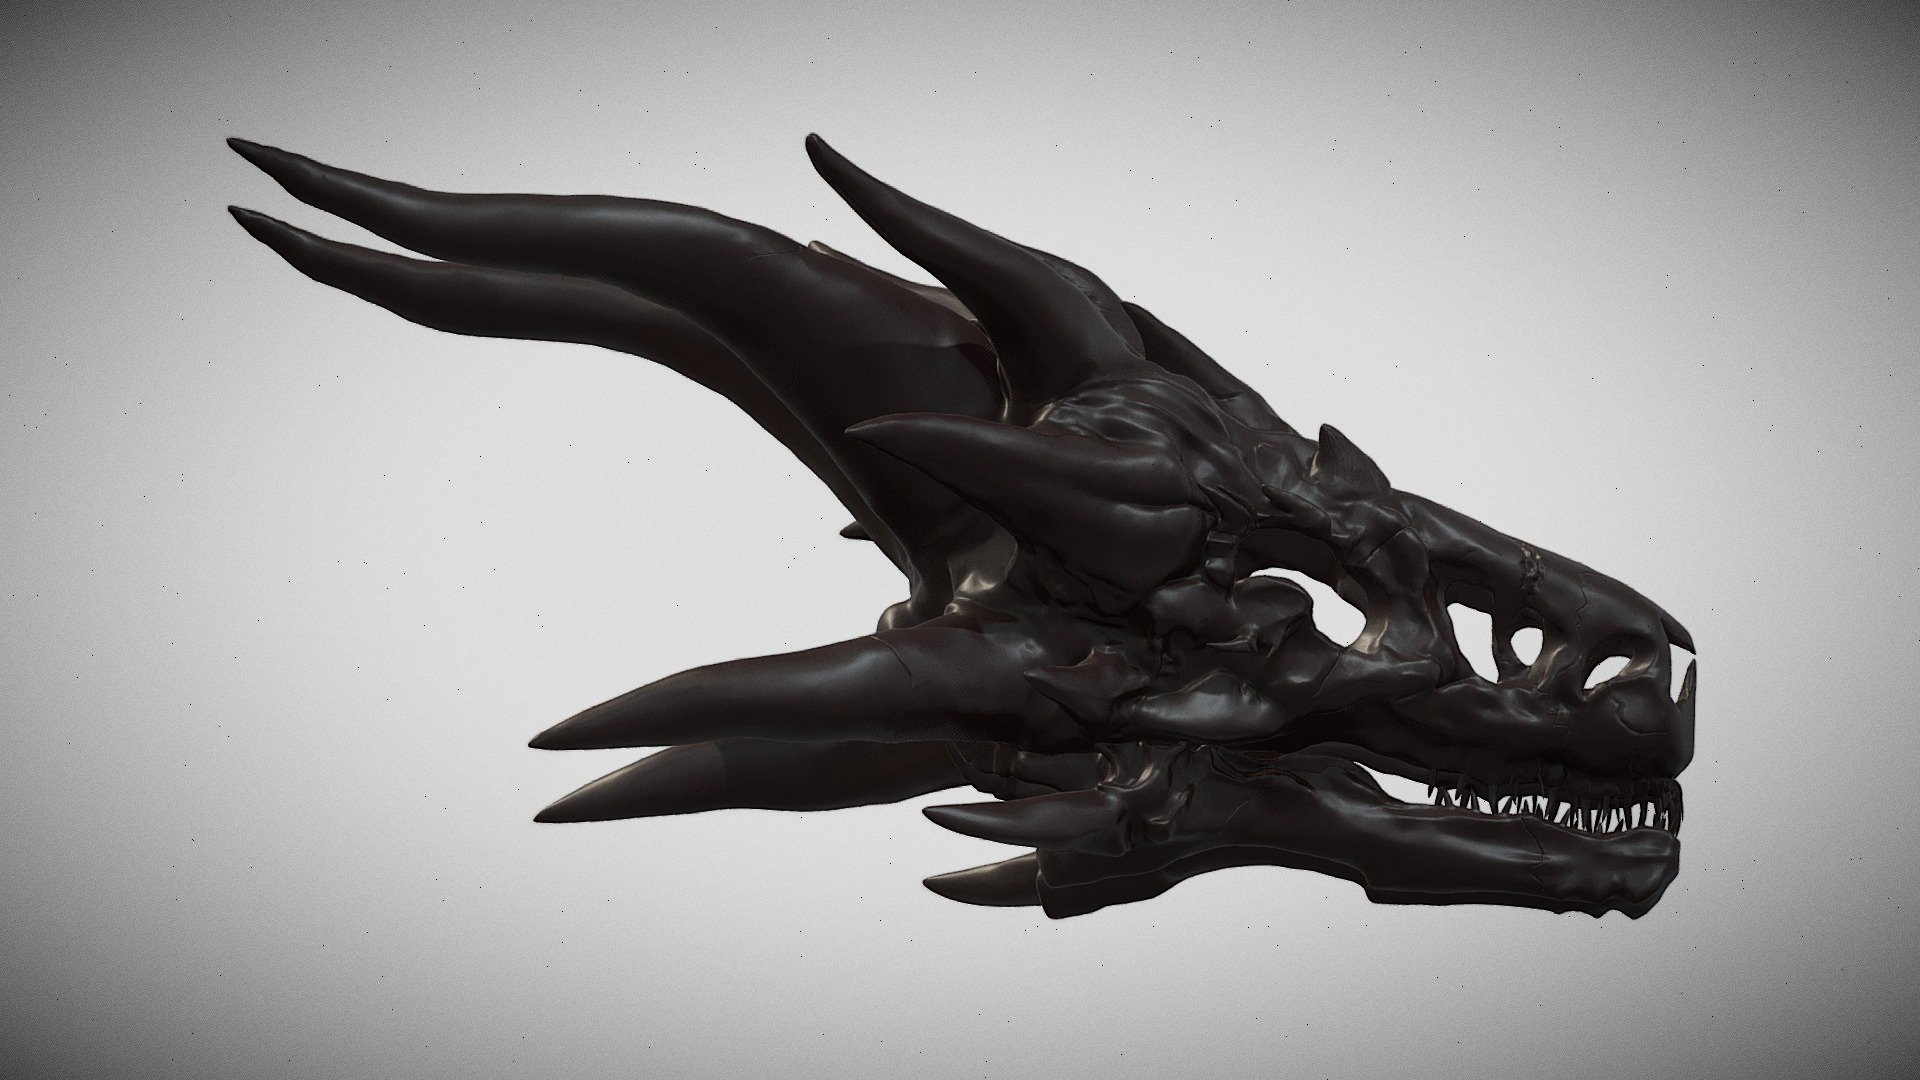 Balerion skull from GAME OF THRONES: House of the dragon - Balerion the Black Dread - 3D model by lmjcarlos31 3d model